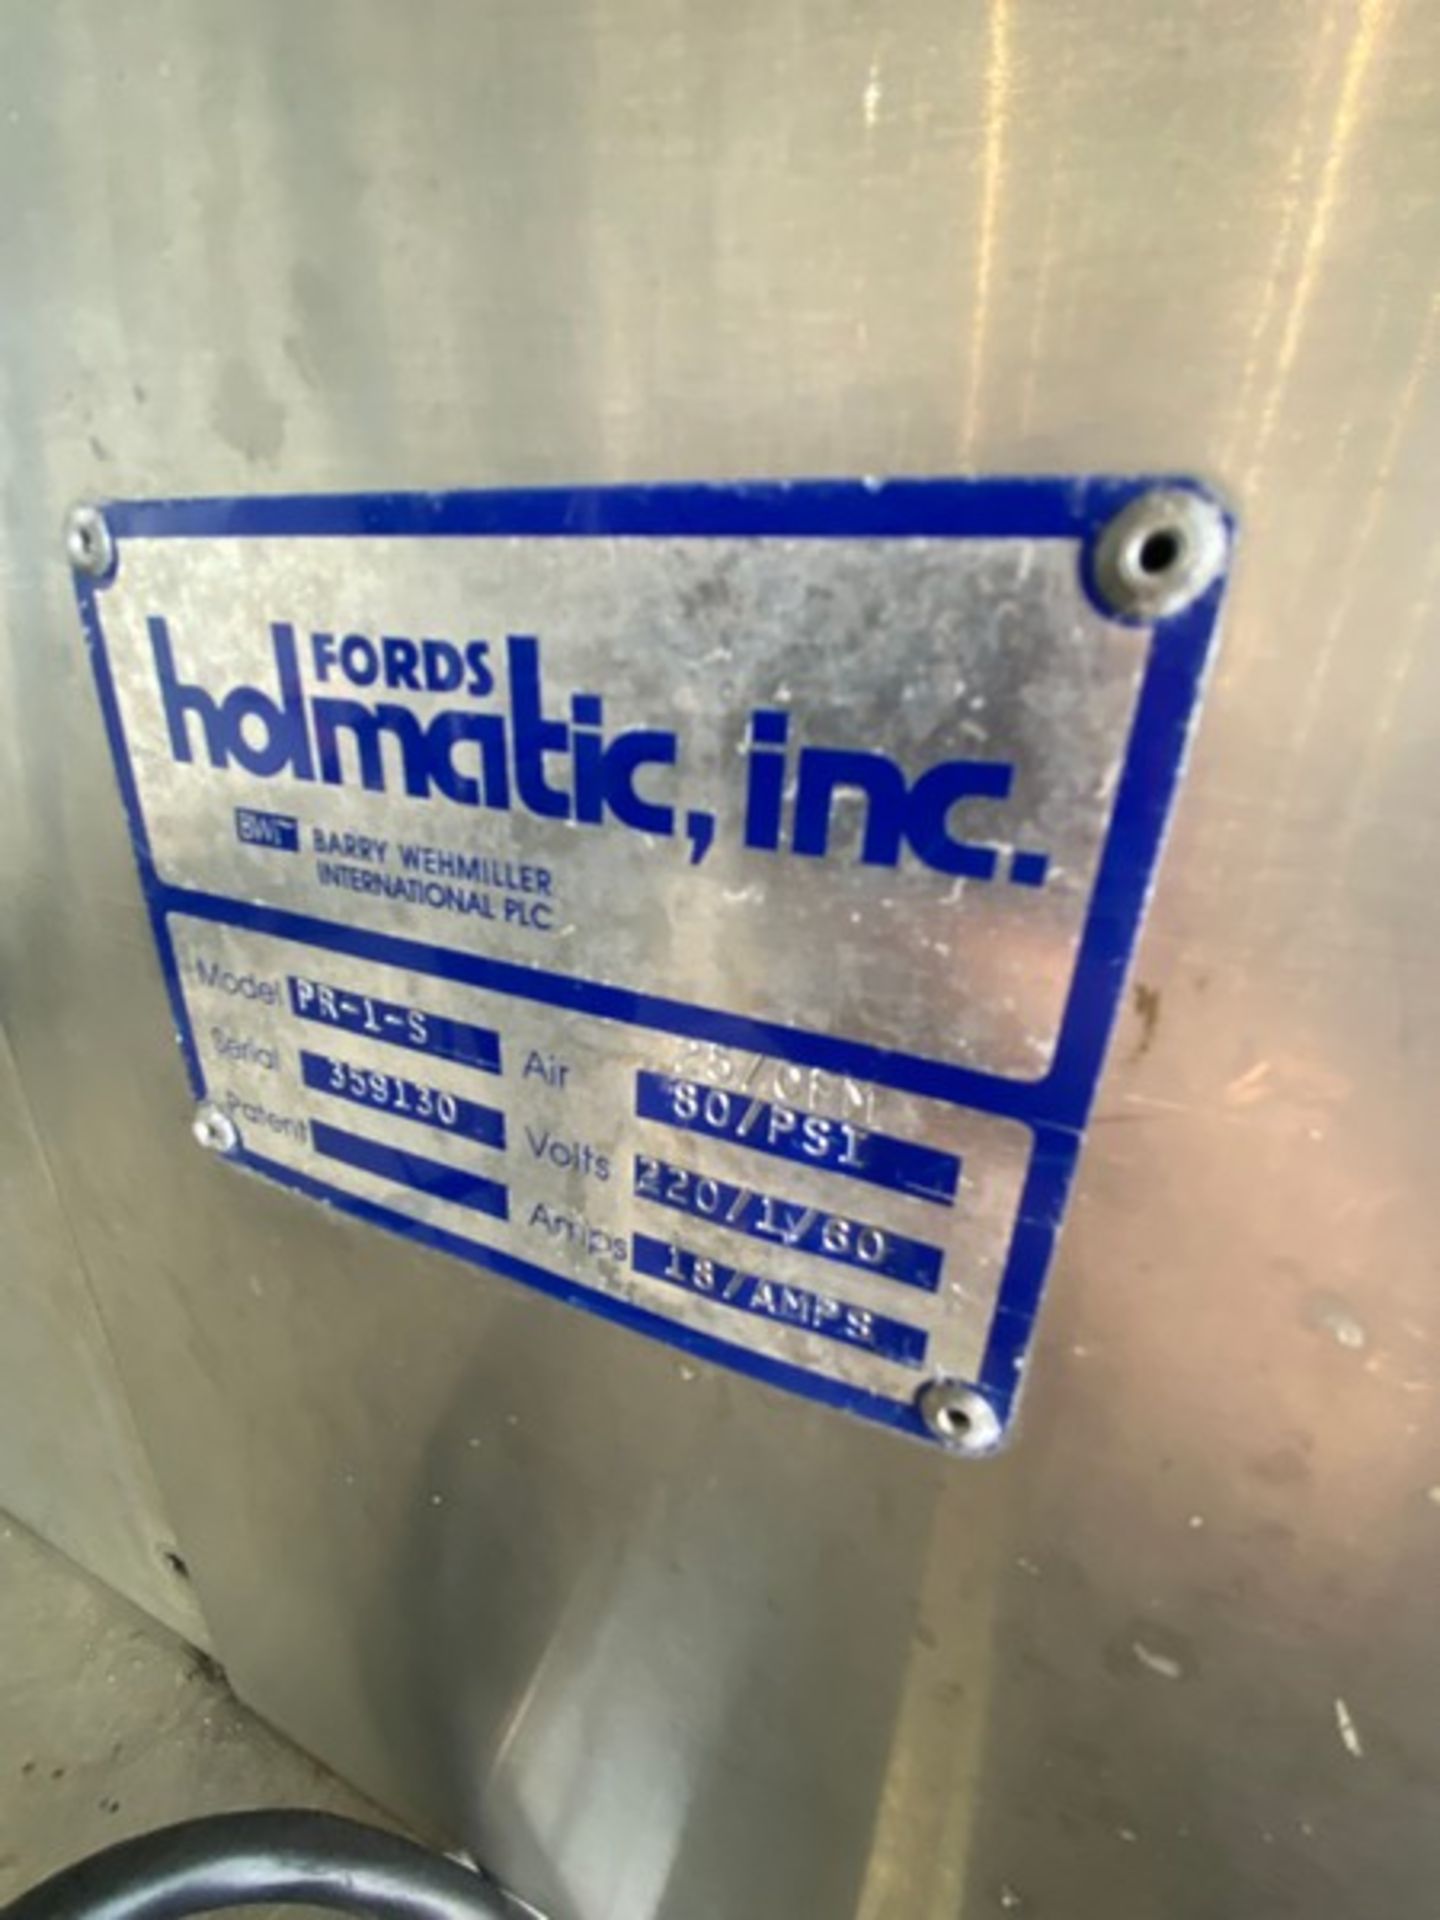 HOLMATIC BULK FILLER, MODEL PR-1-S, S/N 359130, FILLS 5LB AND 40 OZ, TWO SIZE CUPS 513 AND 502 MM, - Image 7 of 20